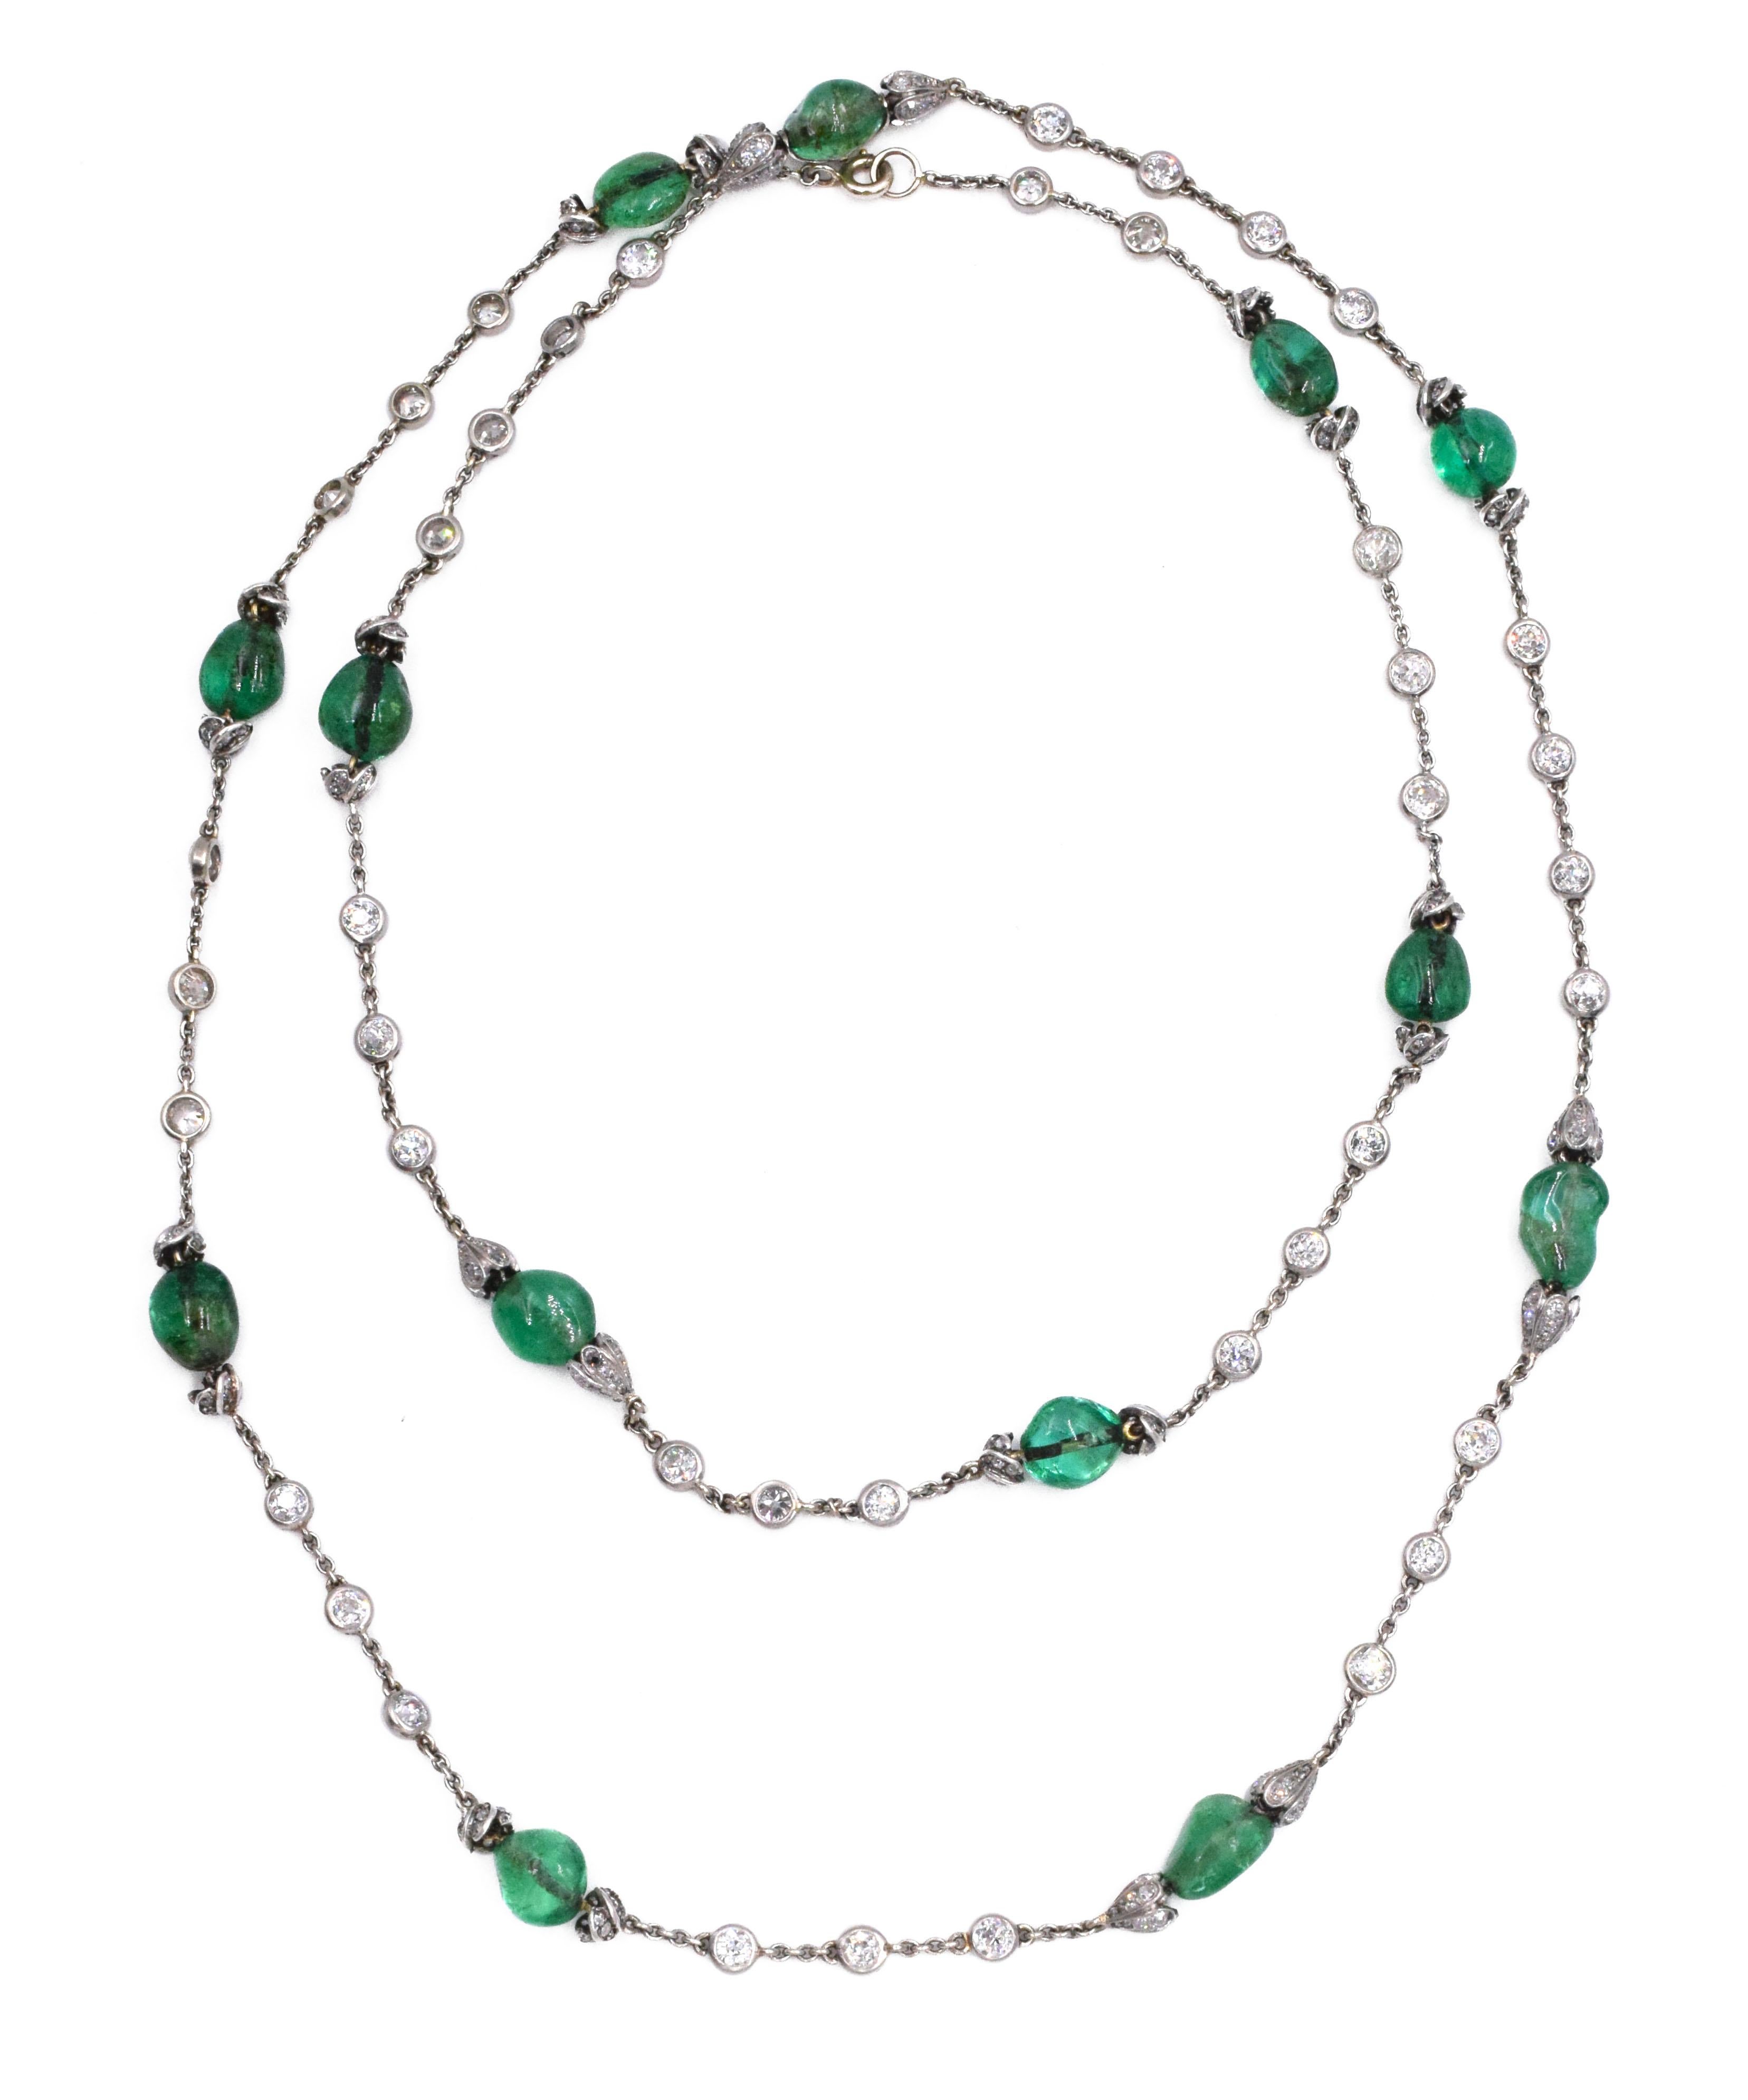 Art Deco Antique Emerald Bead and Diamond Necklace, French